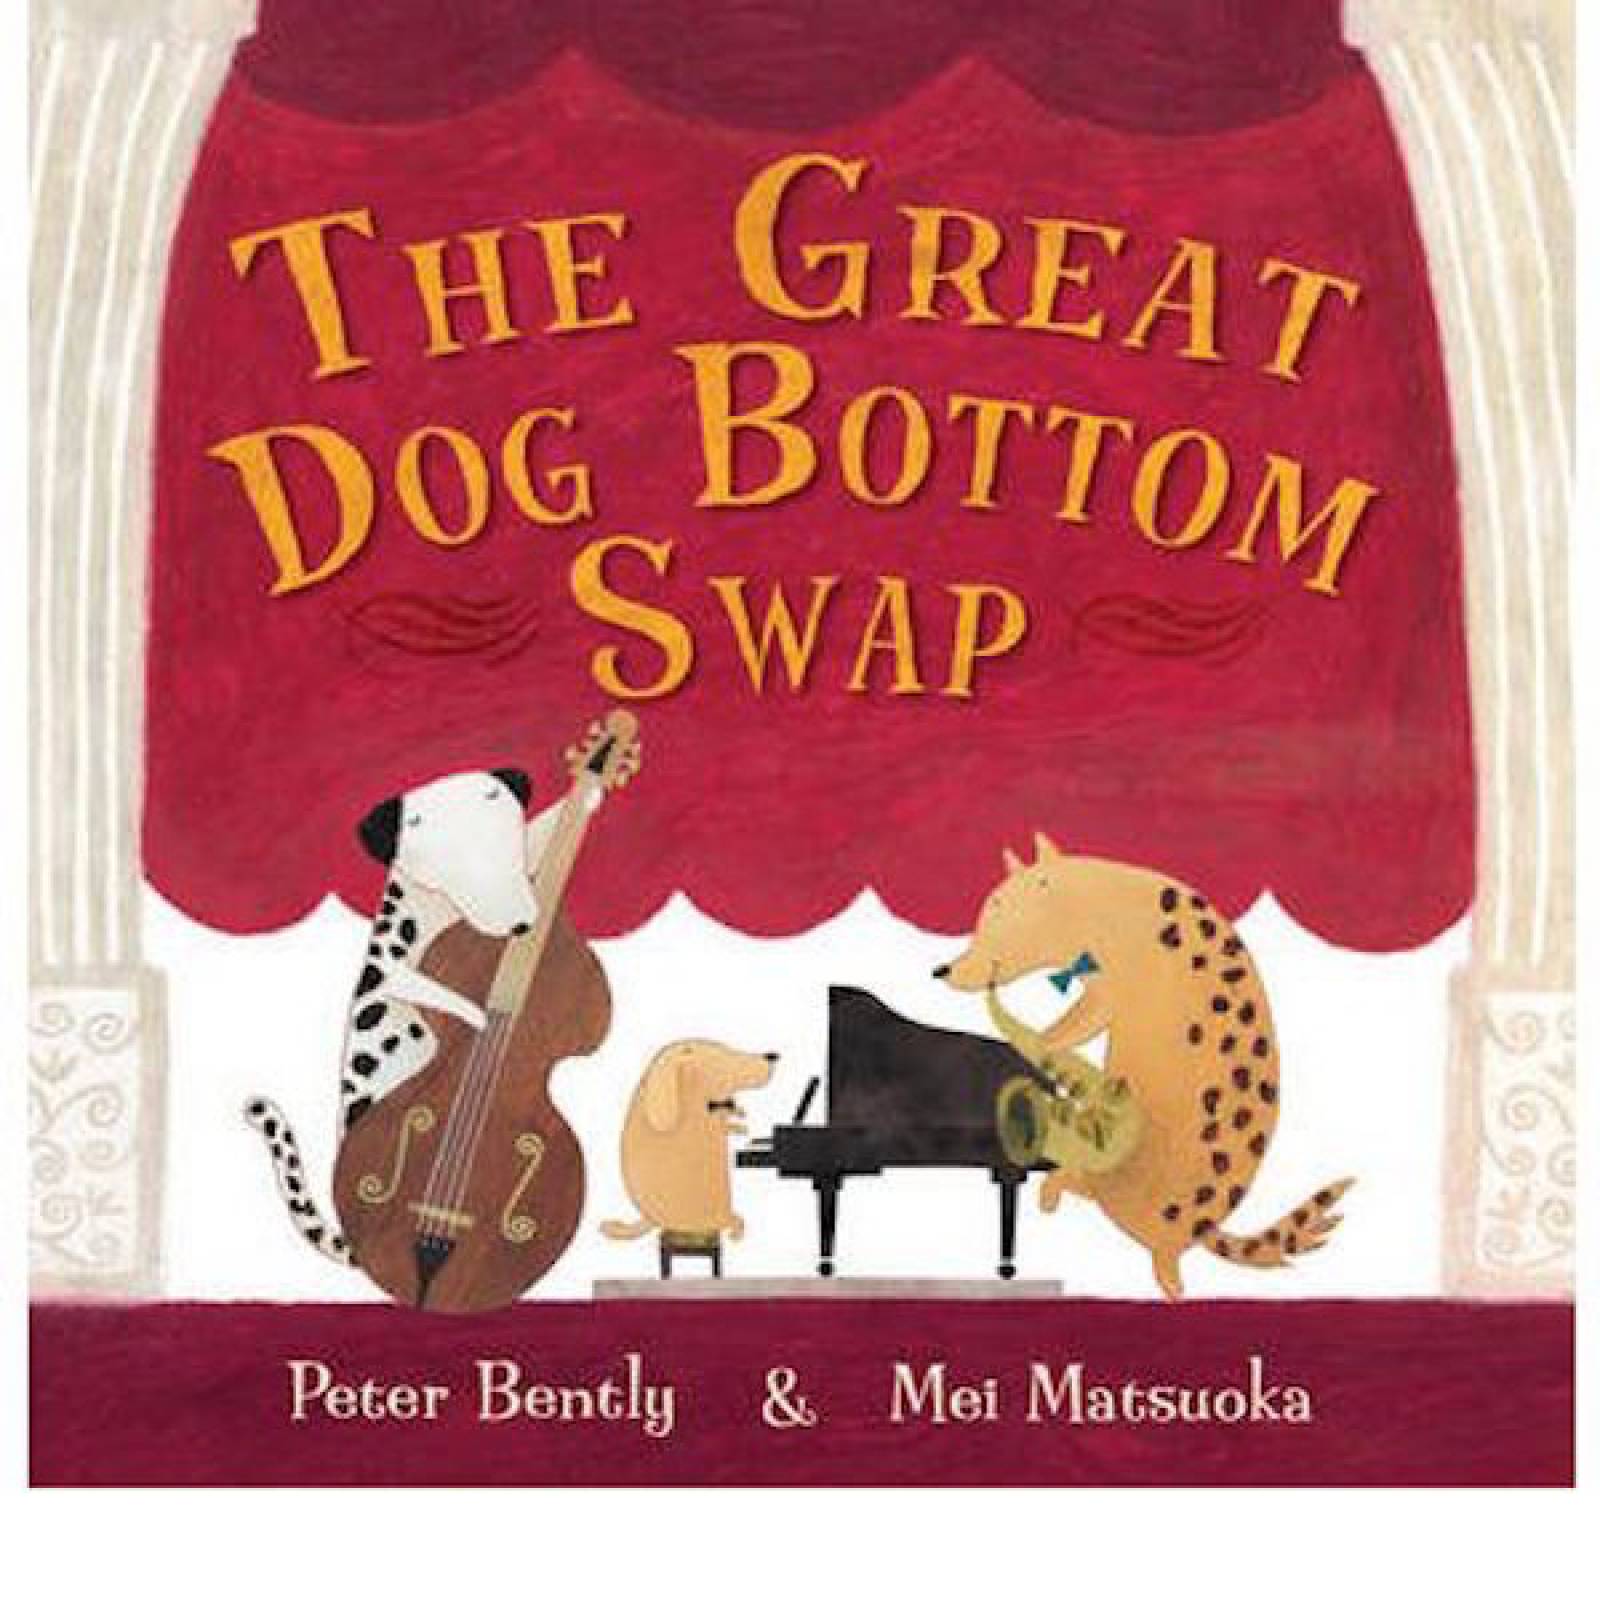 The Great Dog Bottom Swap Paperback Book